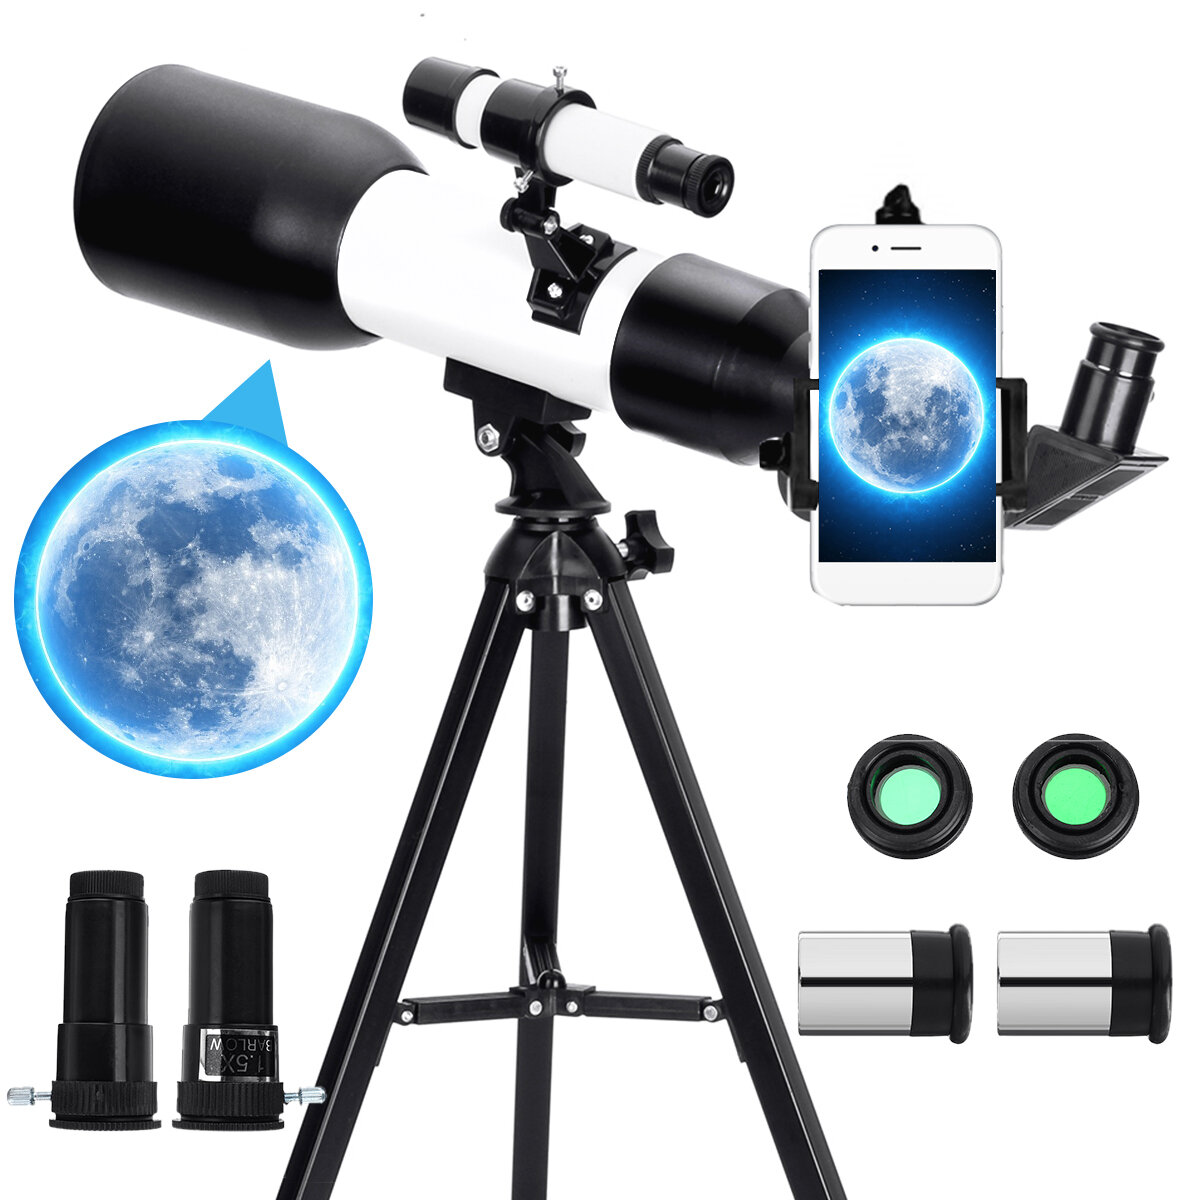 Eyebre Astronomical Telescope 60mm Aperture 360mm Focal μήκος Tripod Outdoor Camping Telescope with Phone Holder